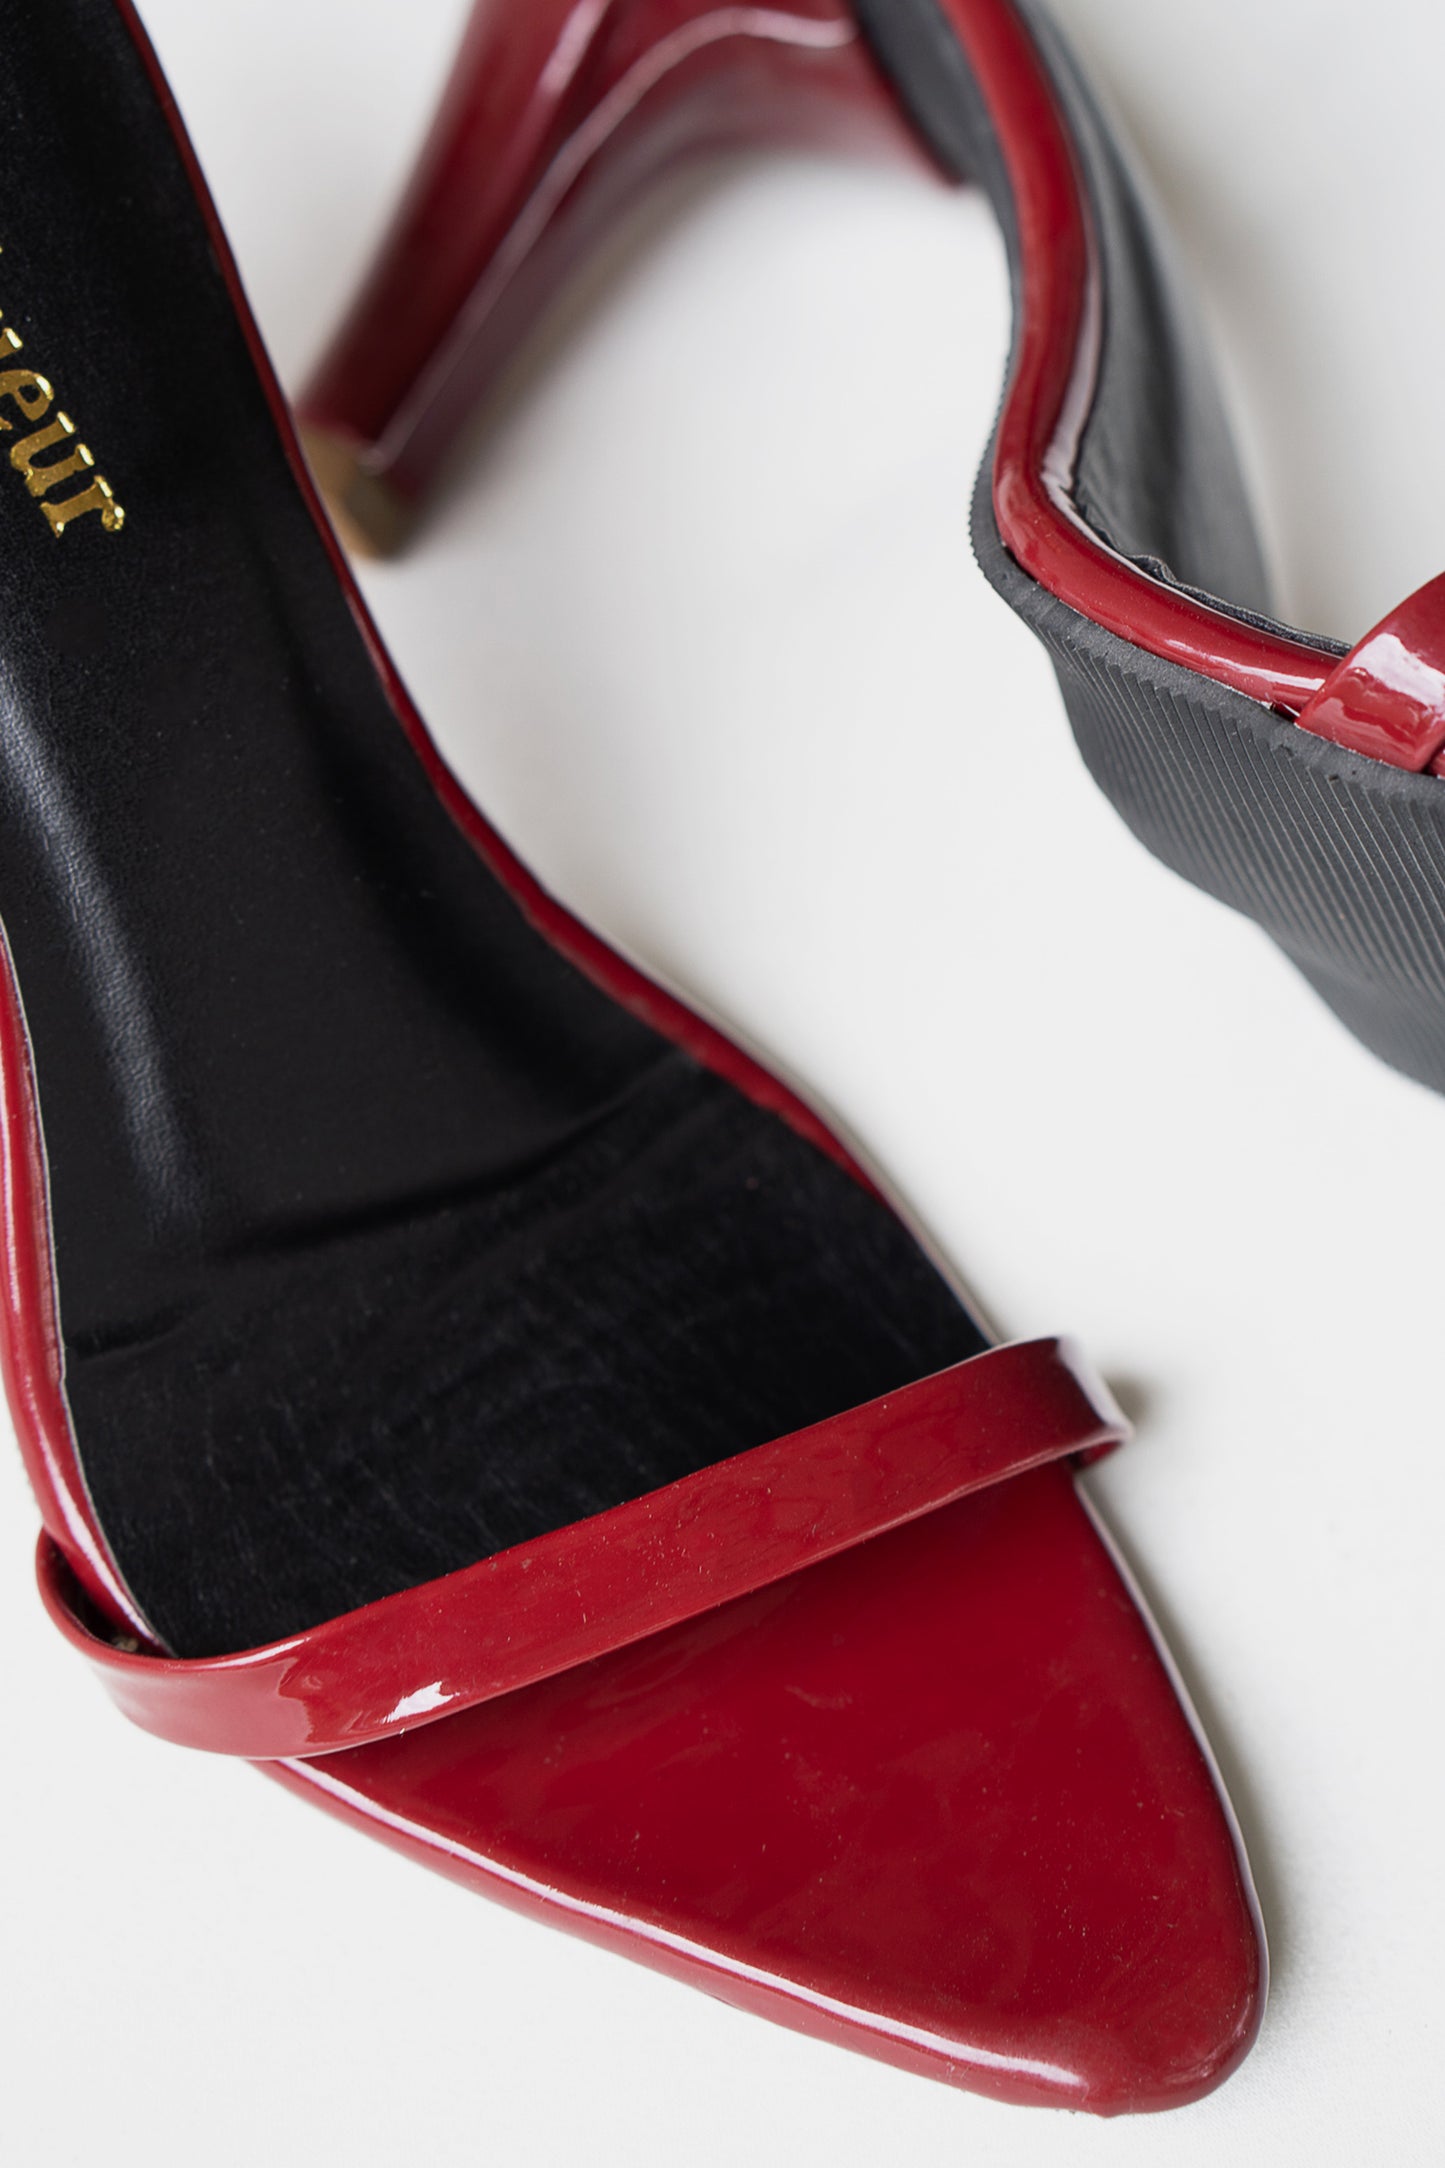 Elegant maroon heel featuring a sophisticated 3-inch lift